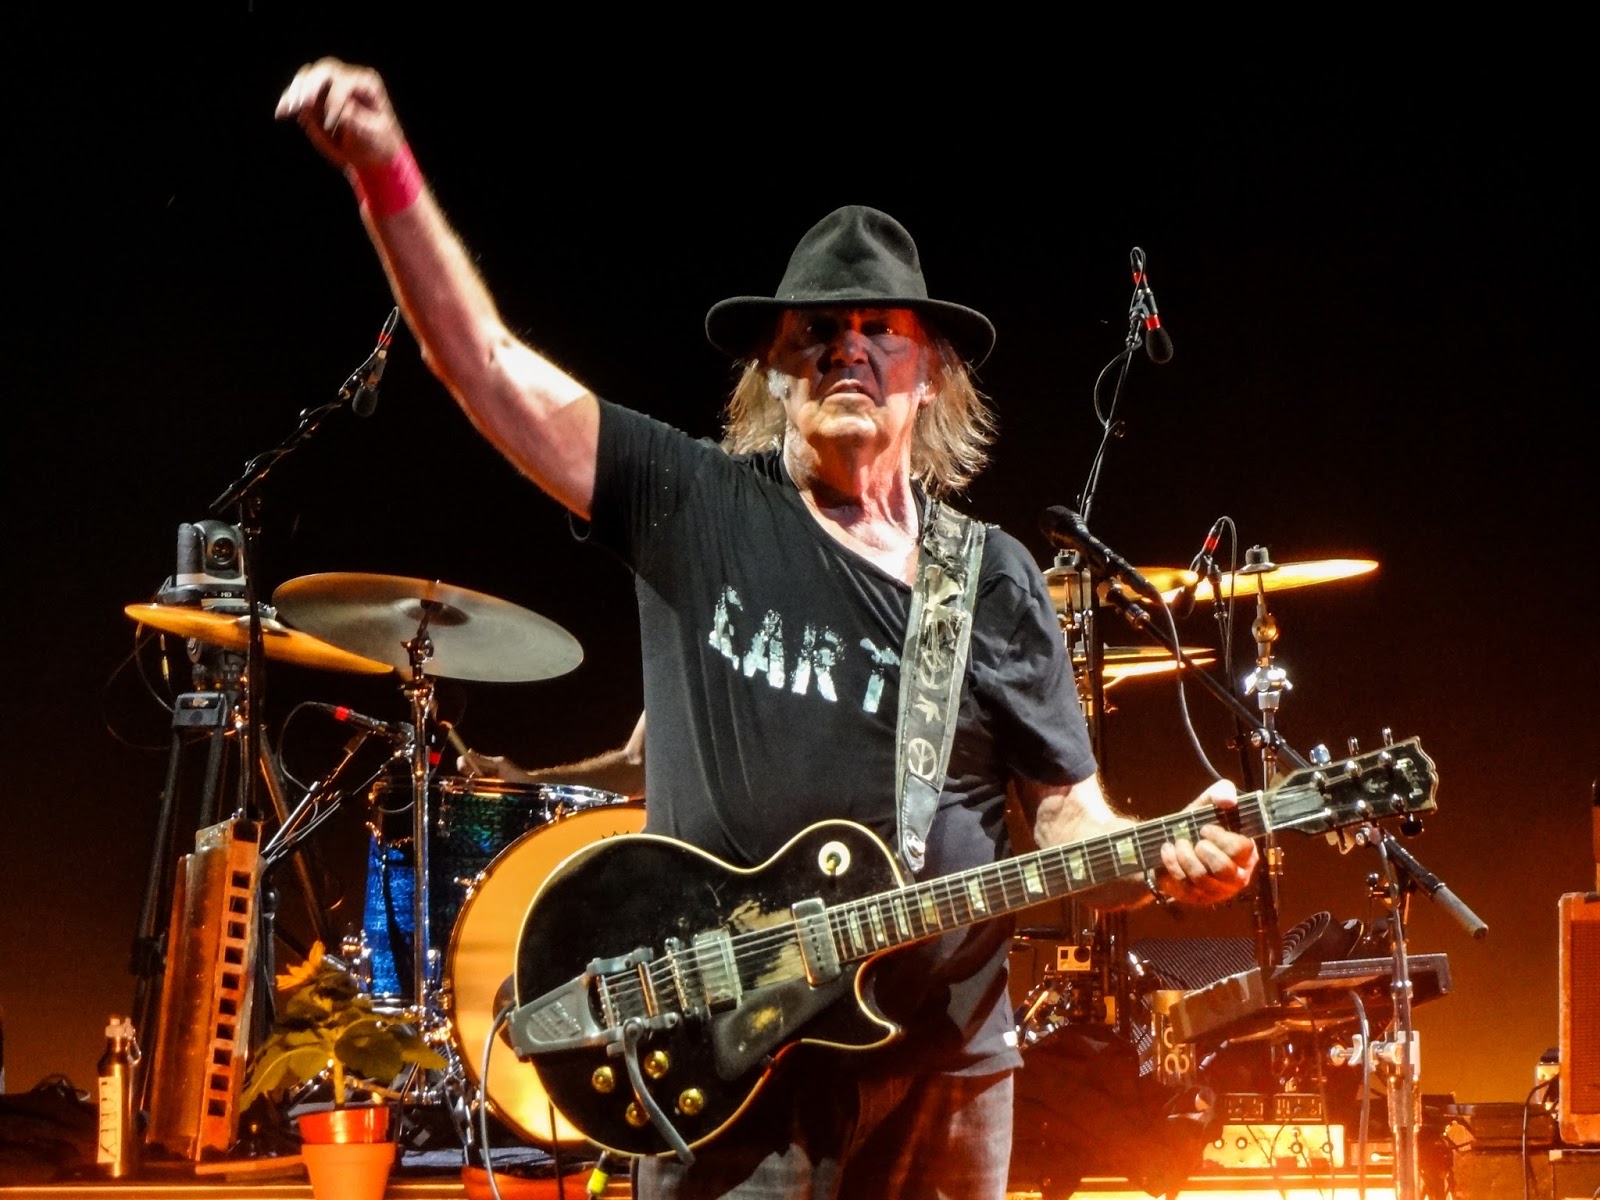 Speakers in Code The 10 Best Concerts of 2015 Neil Young + Promise of